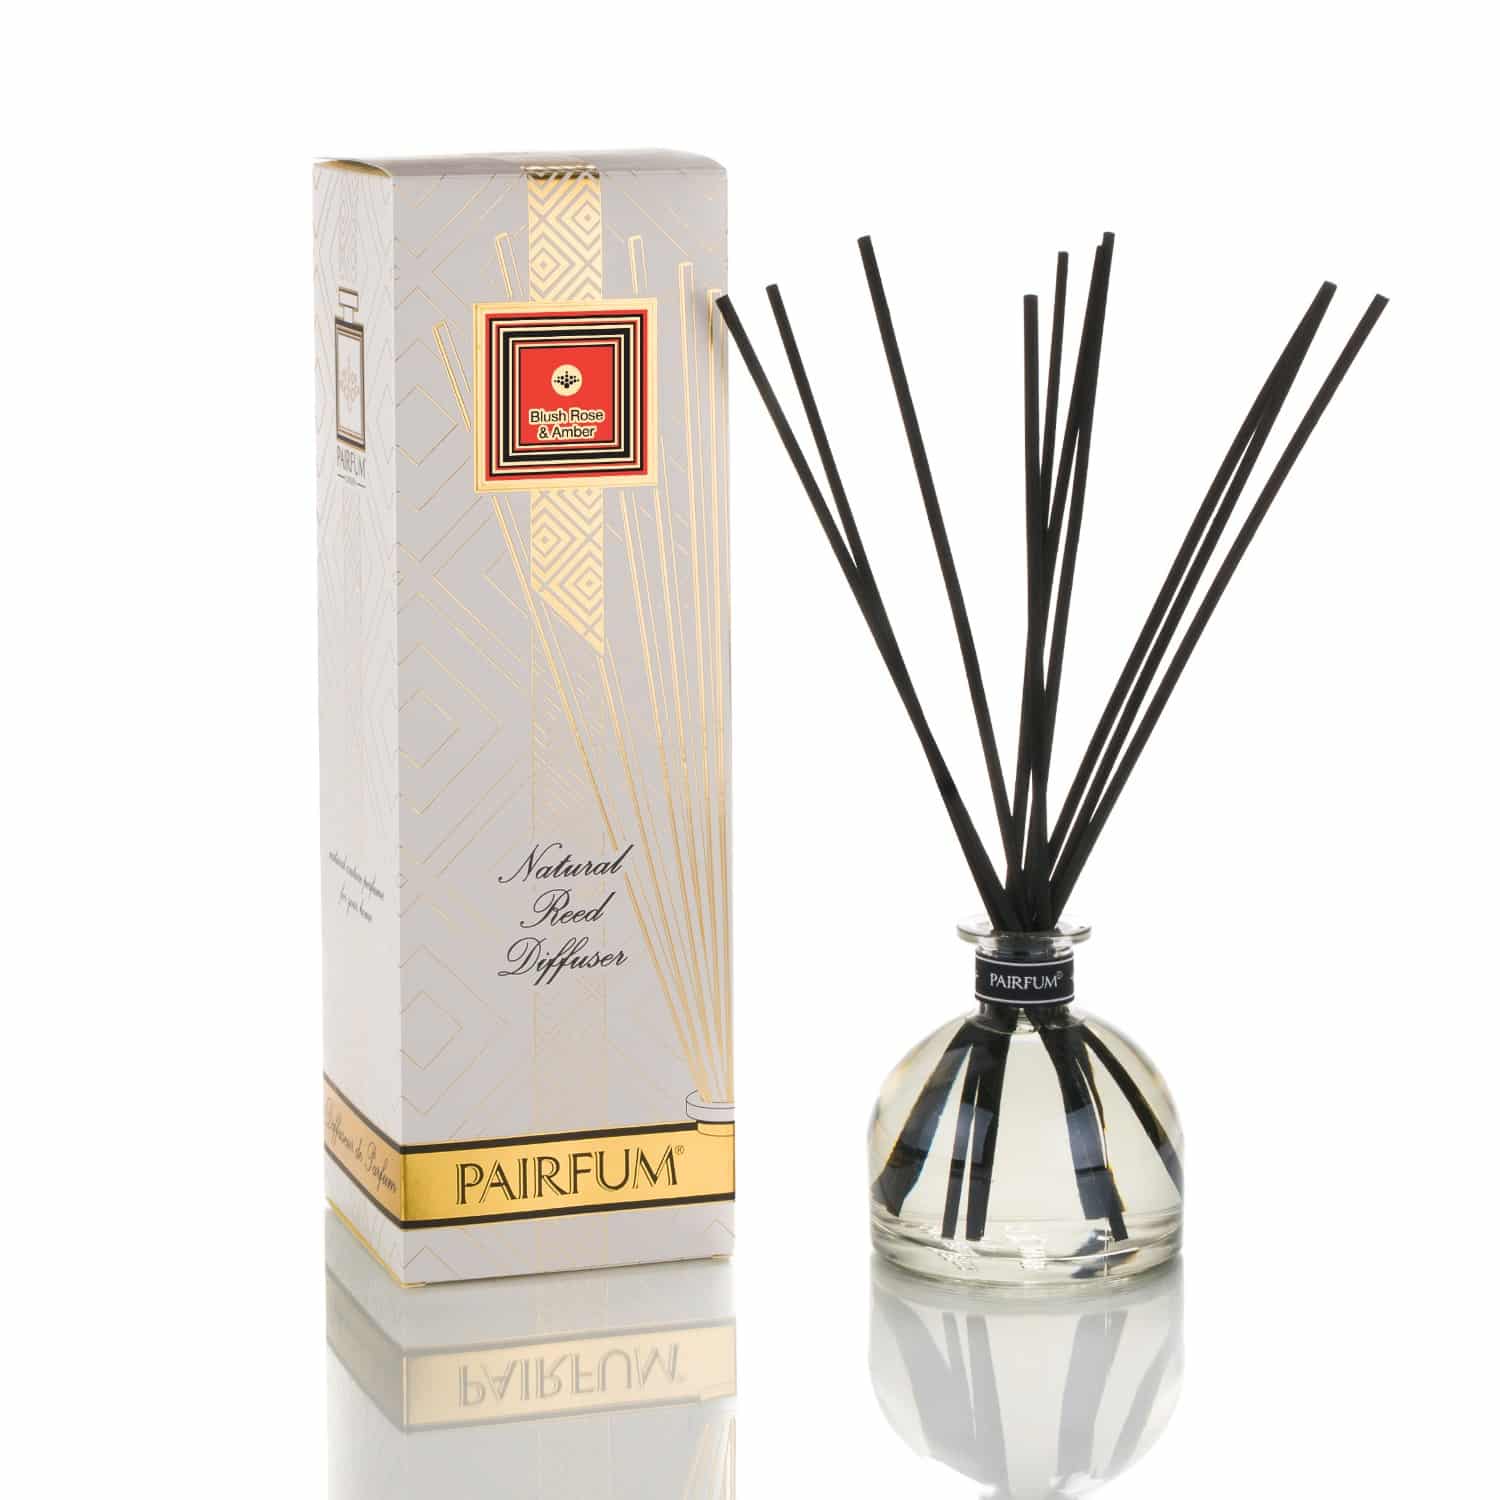 Pairfum Large Reed Diffuser Bell Pure Blush Rose Amber